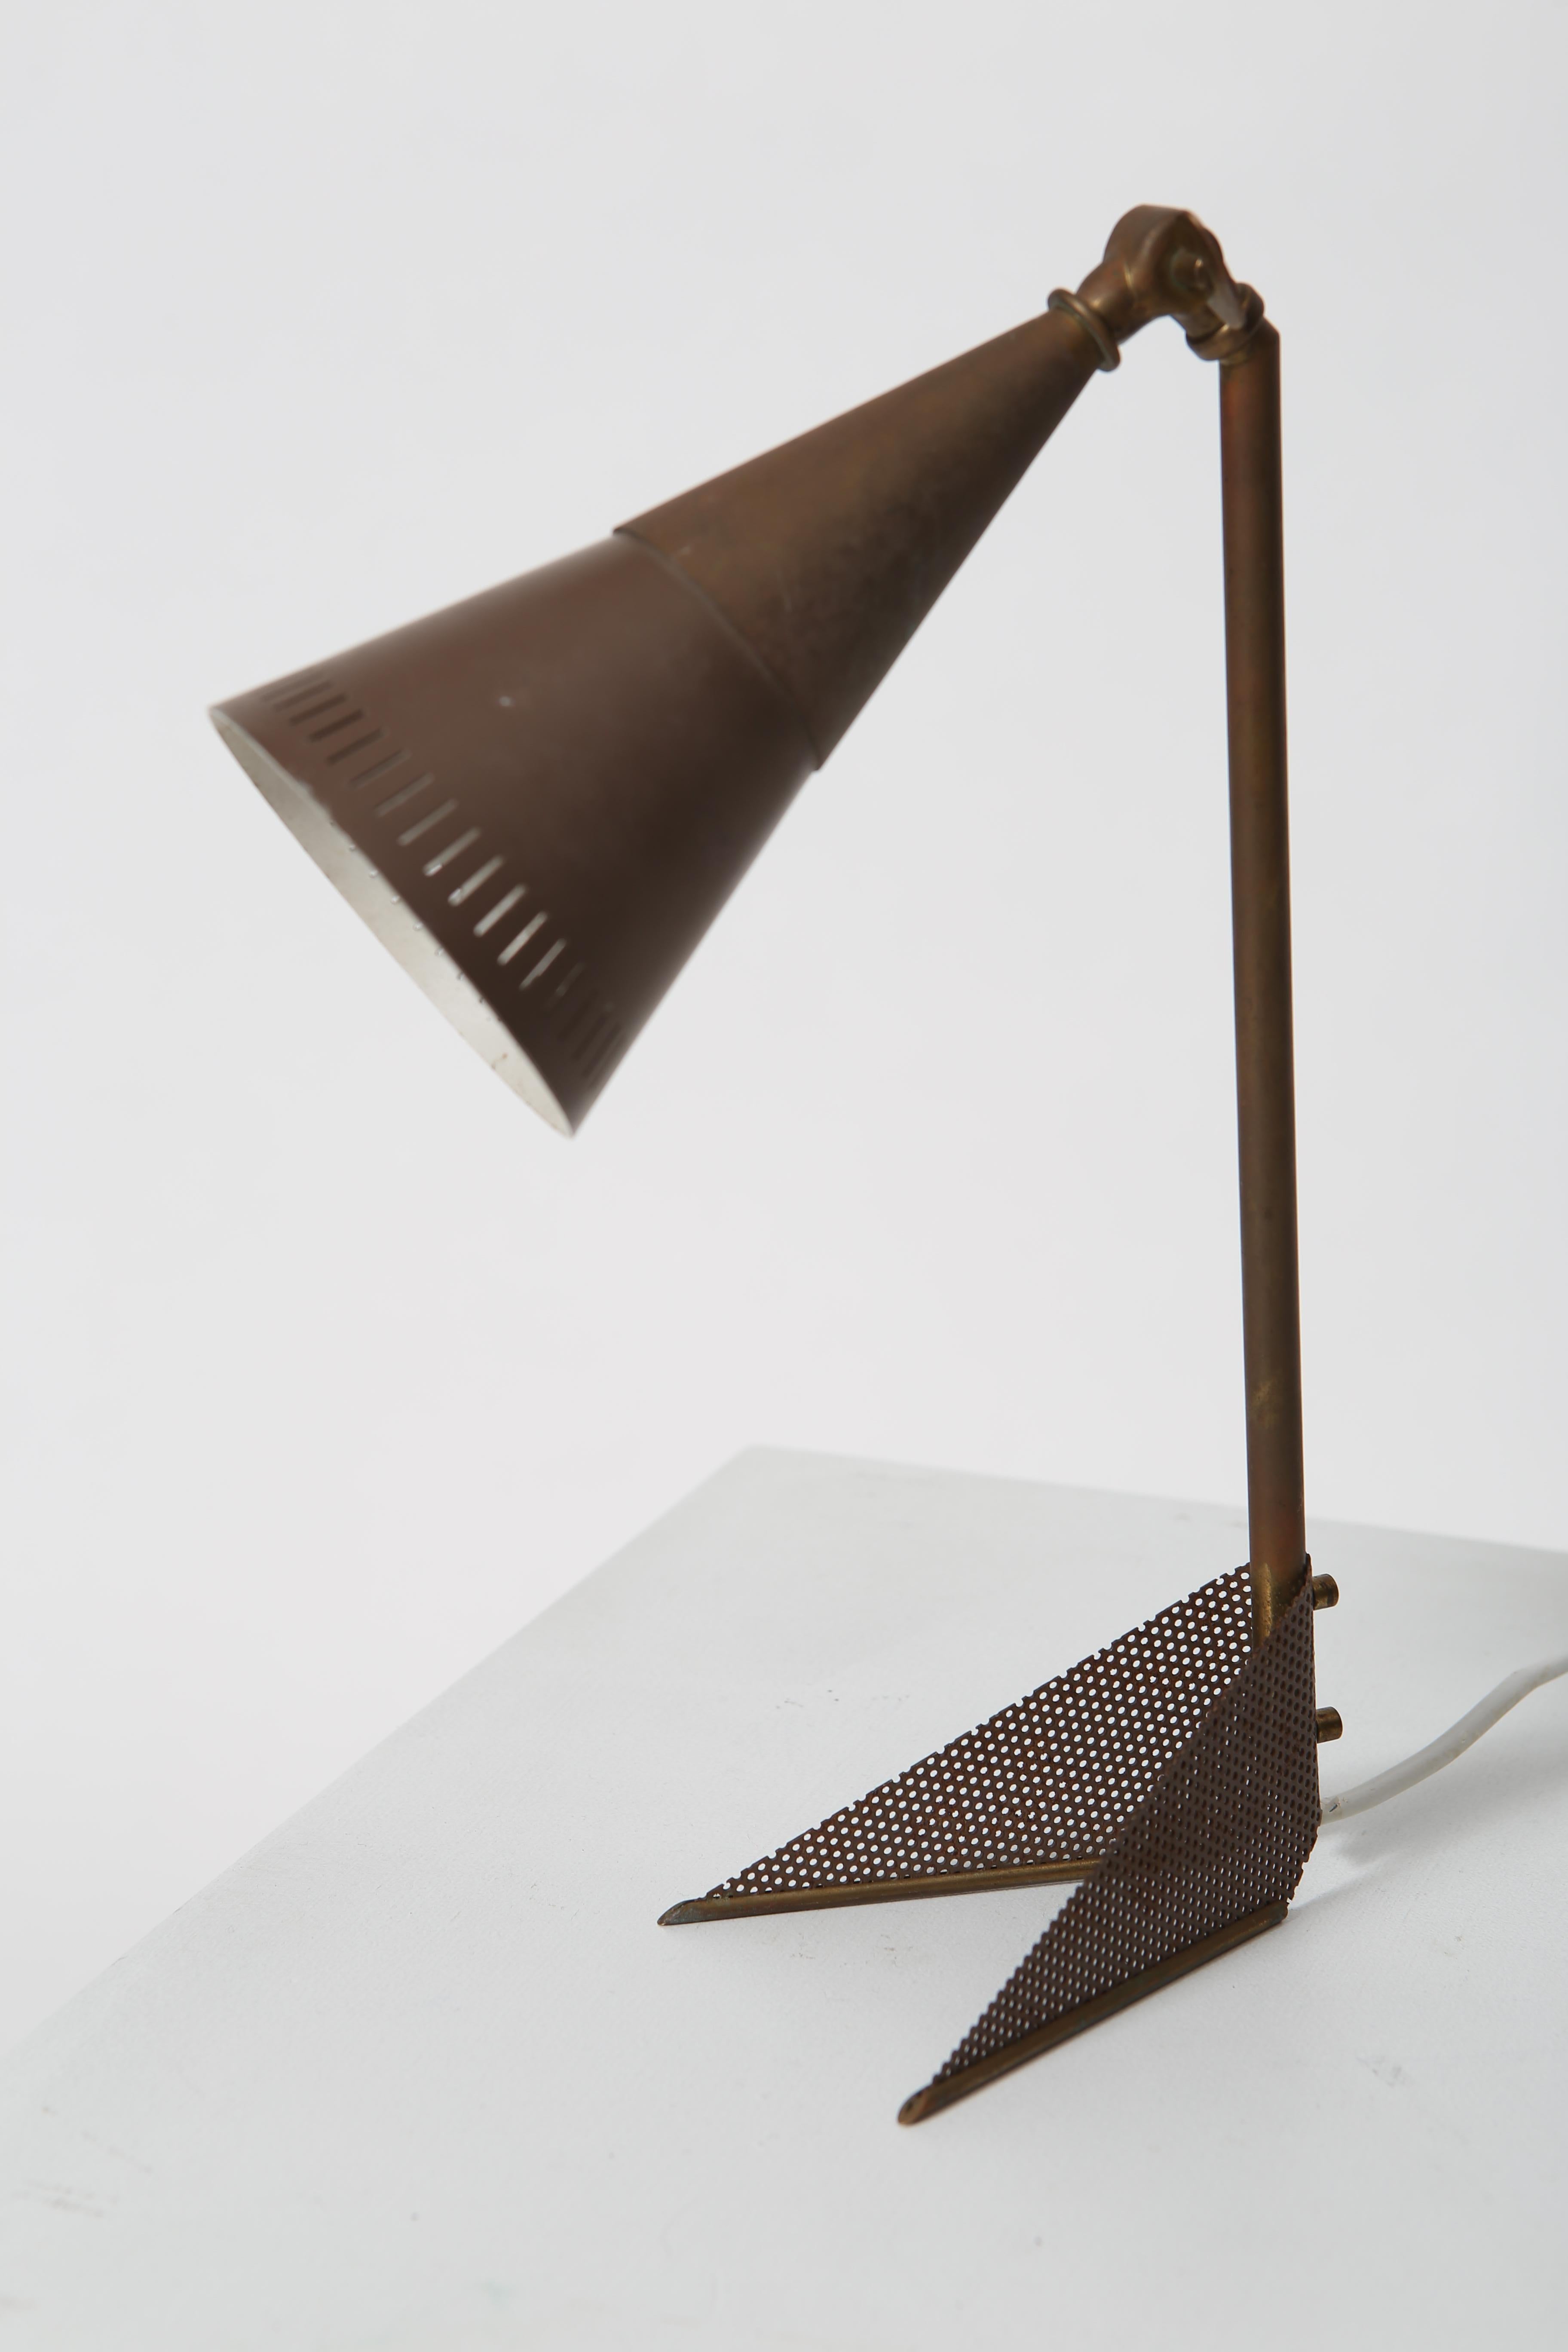 Petite perforated brass lamp with adjustable conical shade. Shade is white lacquered inside, perfectly patinated brass exterior. Wonderful little lamp, recently imported from Denmark. Unknown designer. Recommend rewiring however it is functional as